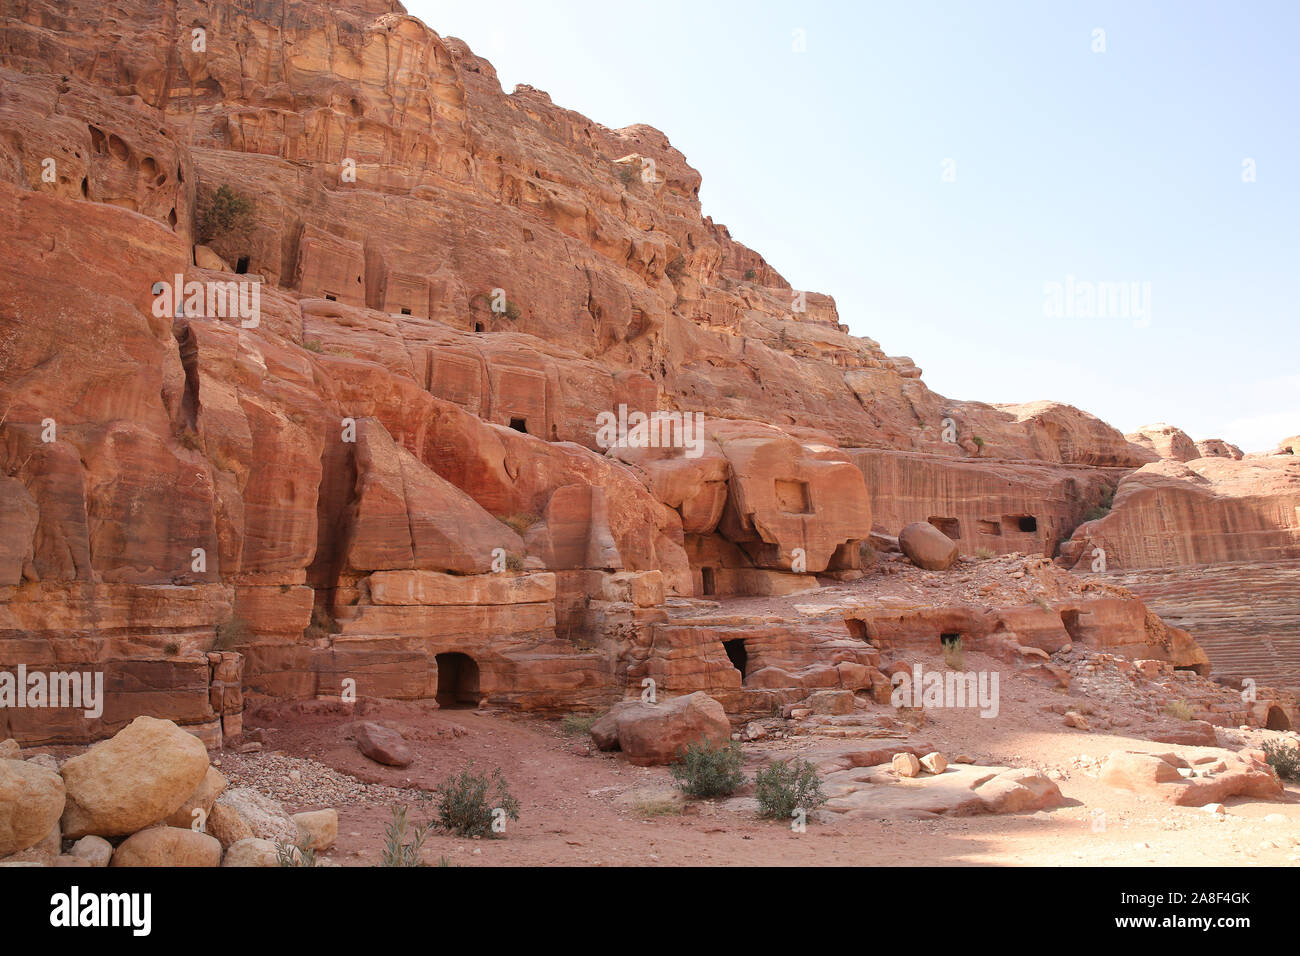 Street of Facades, which is caves with doors carved out of the red stone, Petra, Jordan. Stock Photo